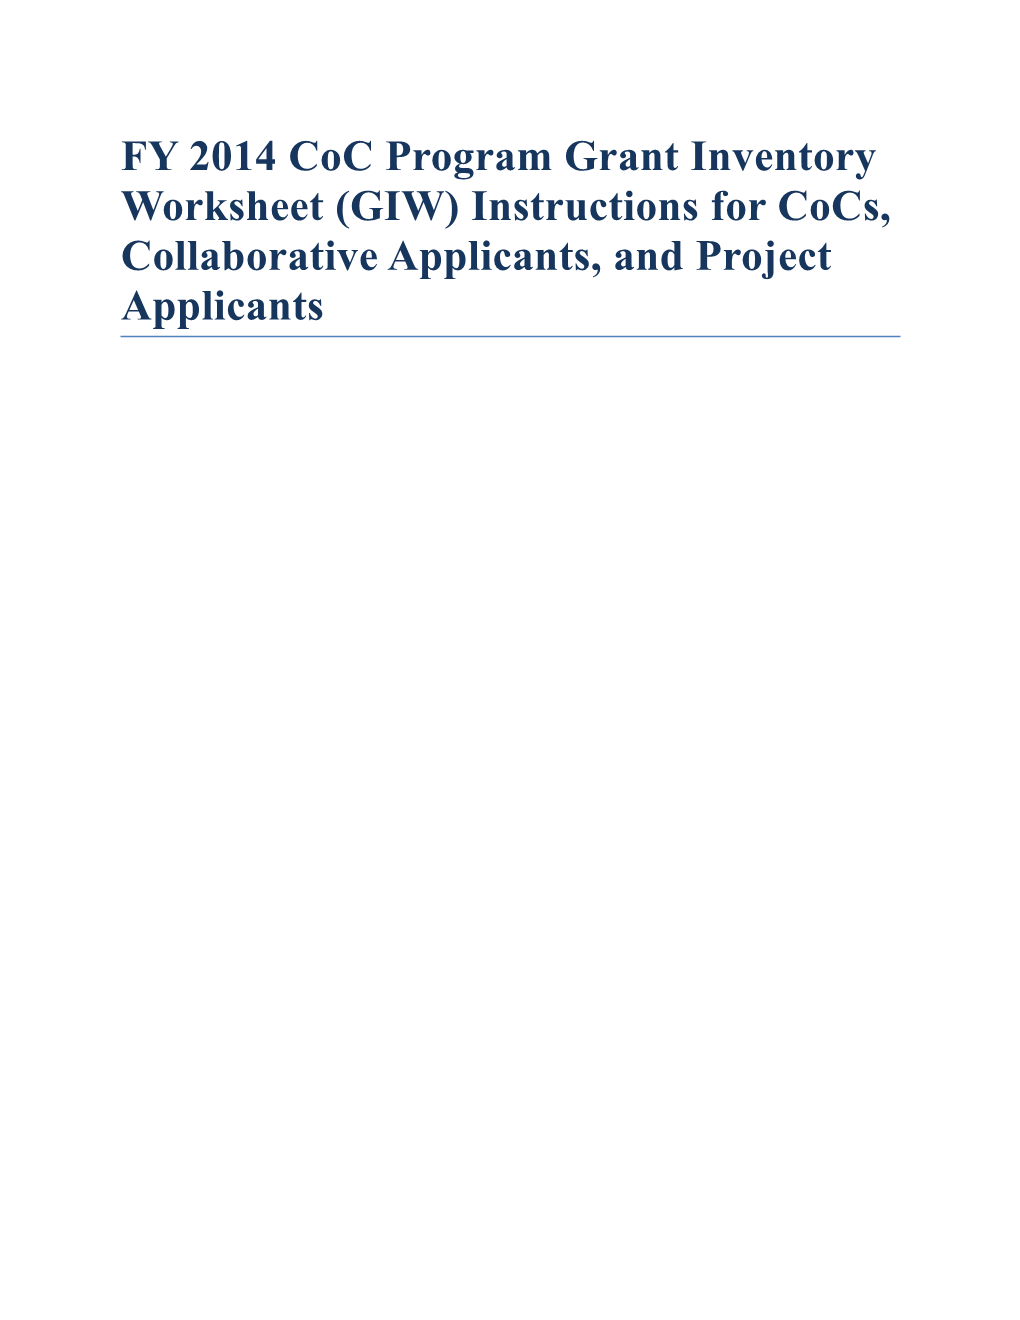 FY 2014 Coc Program Grant Inventory Worksheet (GIW) Instructions for Cocs, Collaborative